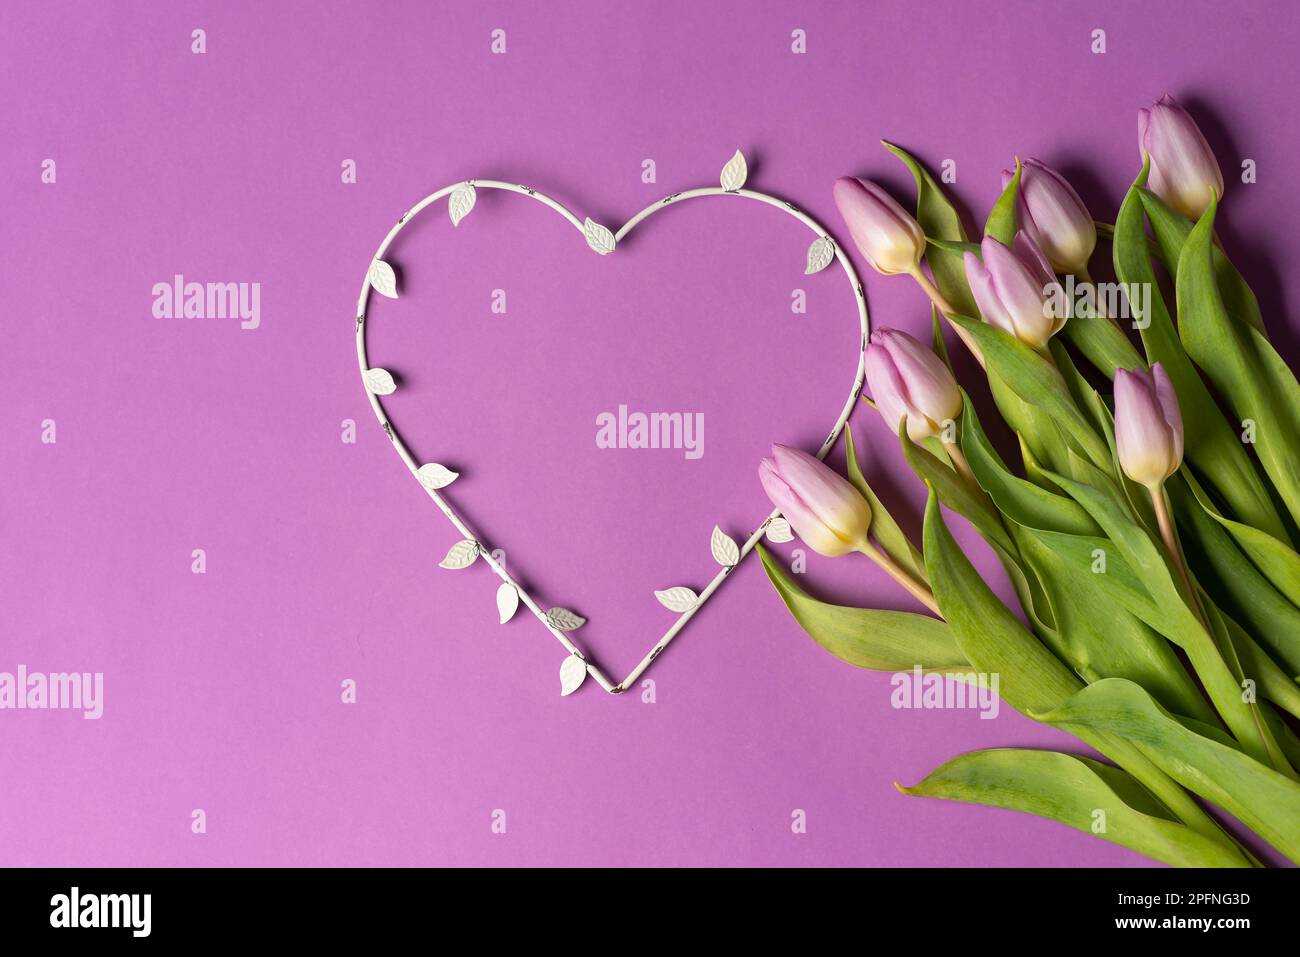 Purple tulips with a heart shape on matching purple background arrangement top view flat lay with copy space Stock Photo